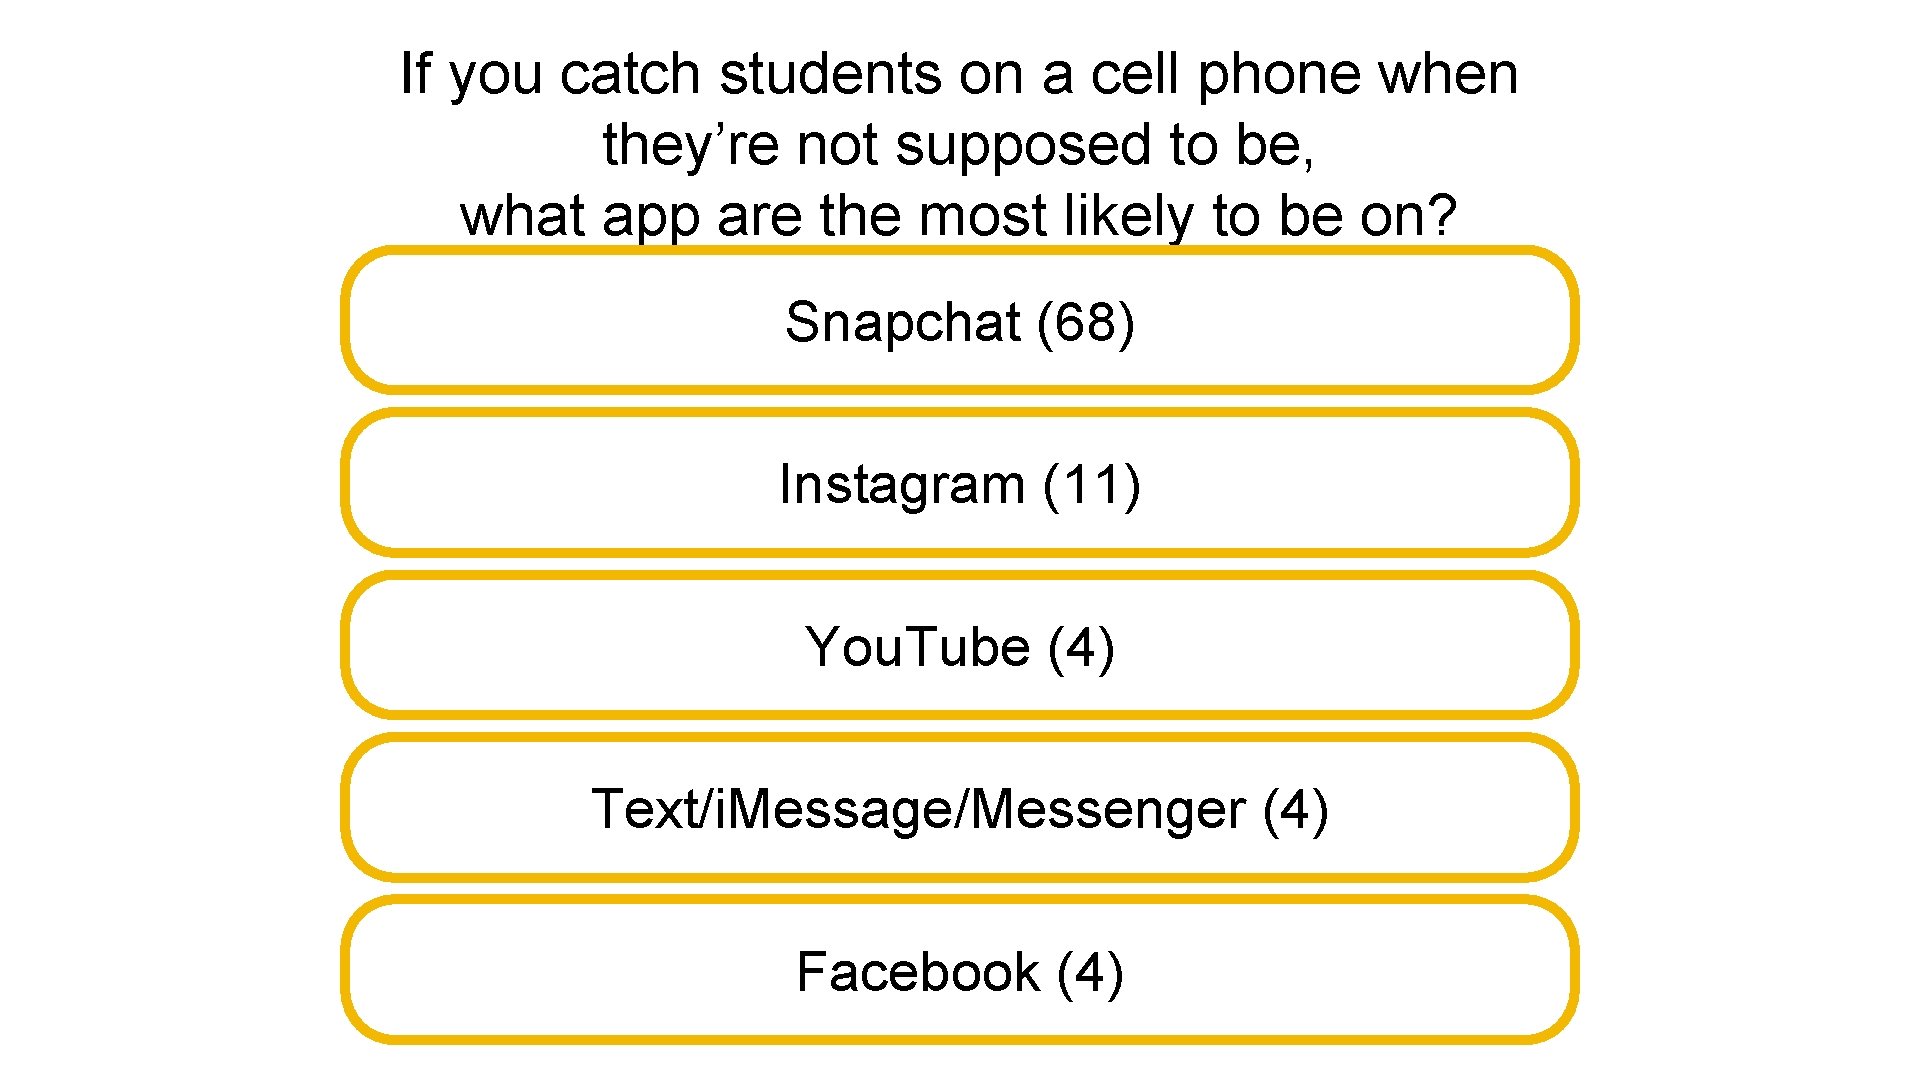 If you catch students on a cell phone when they’re not supposed to be,